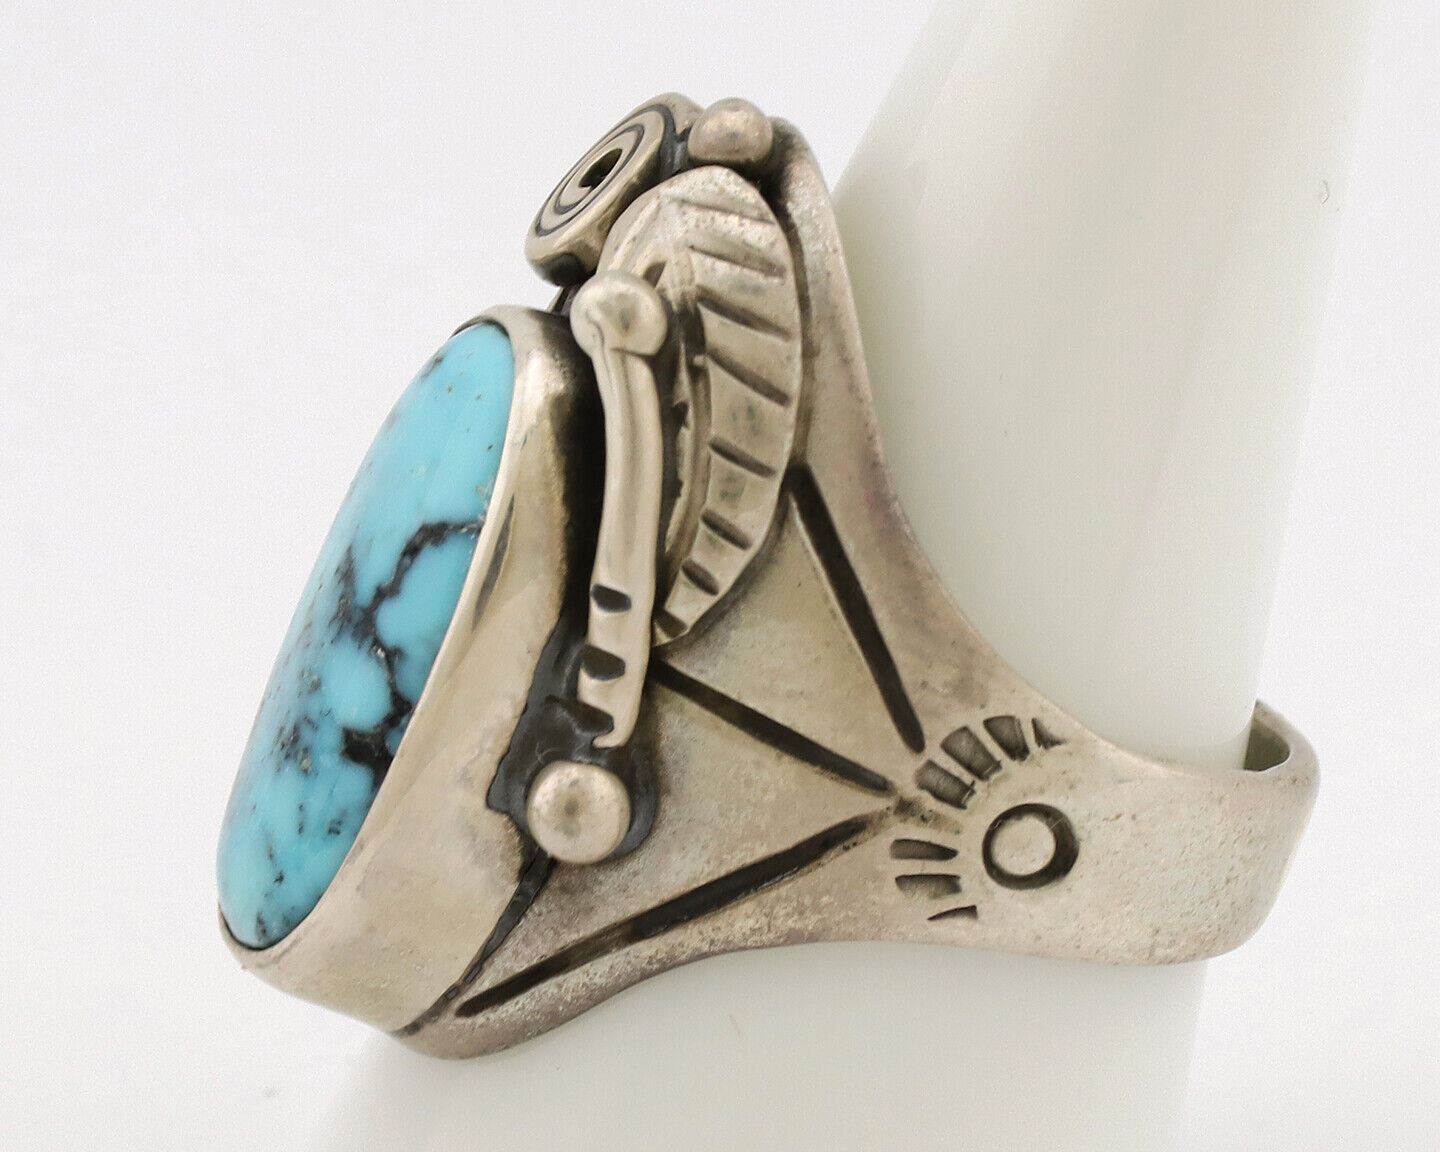 Navajo Ring .925 Silver Natural Blue Turquoise Native American Artist C.1980's